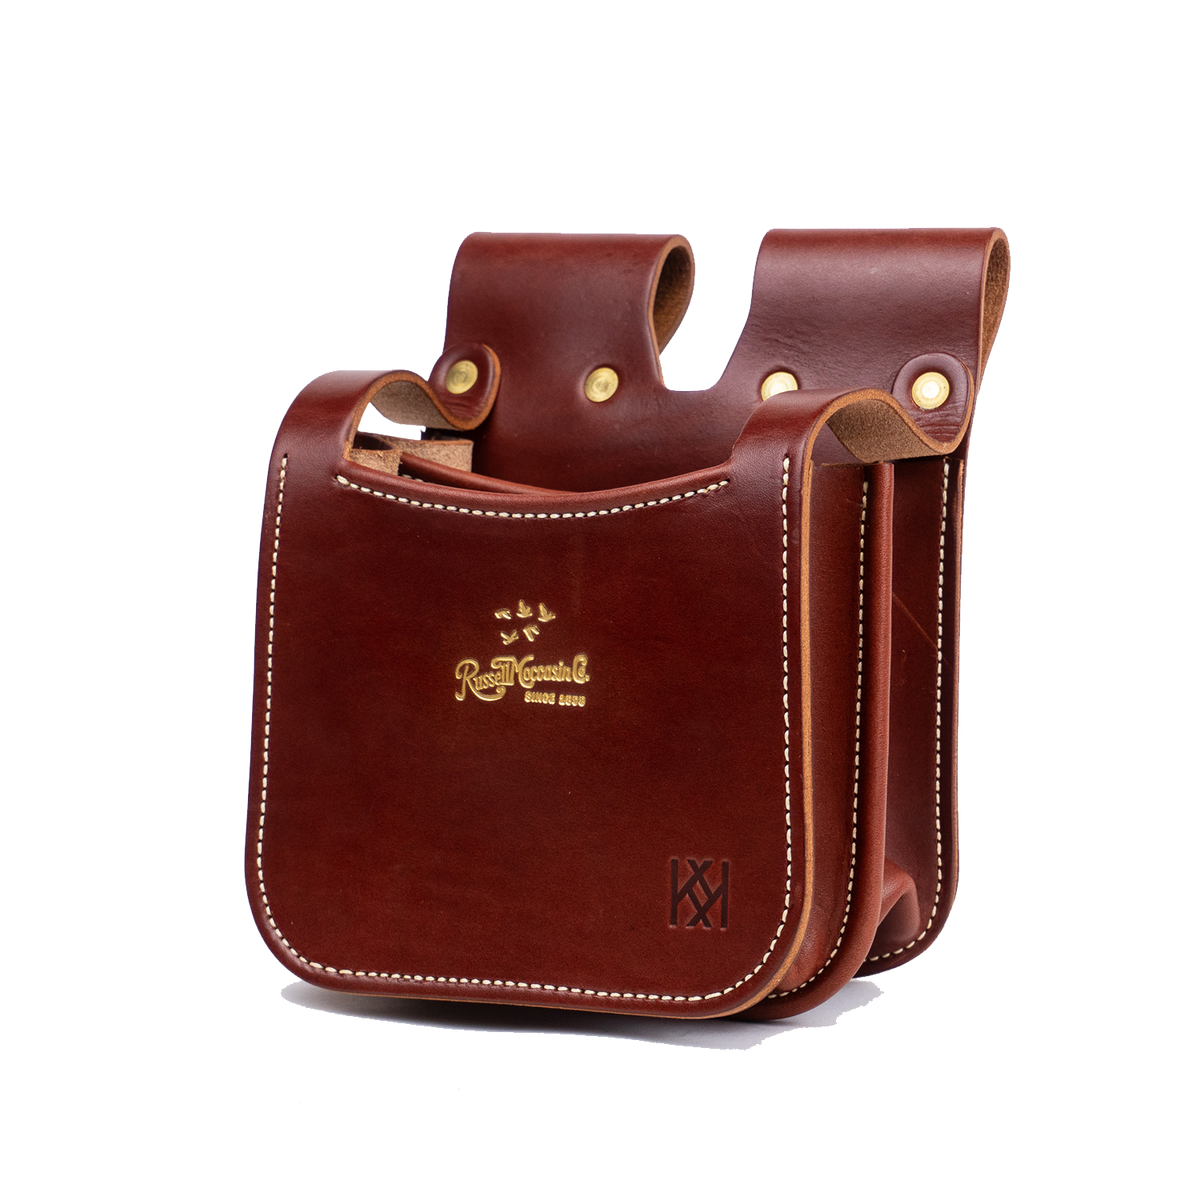 Russell X Kingfisher Sporting Clays Bag